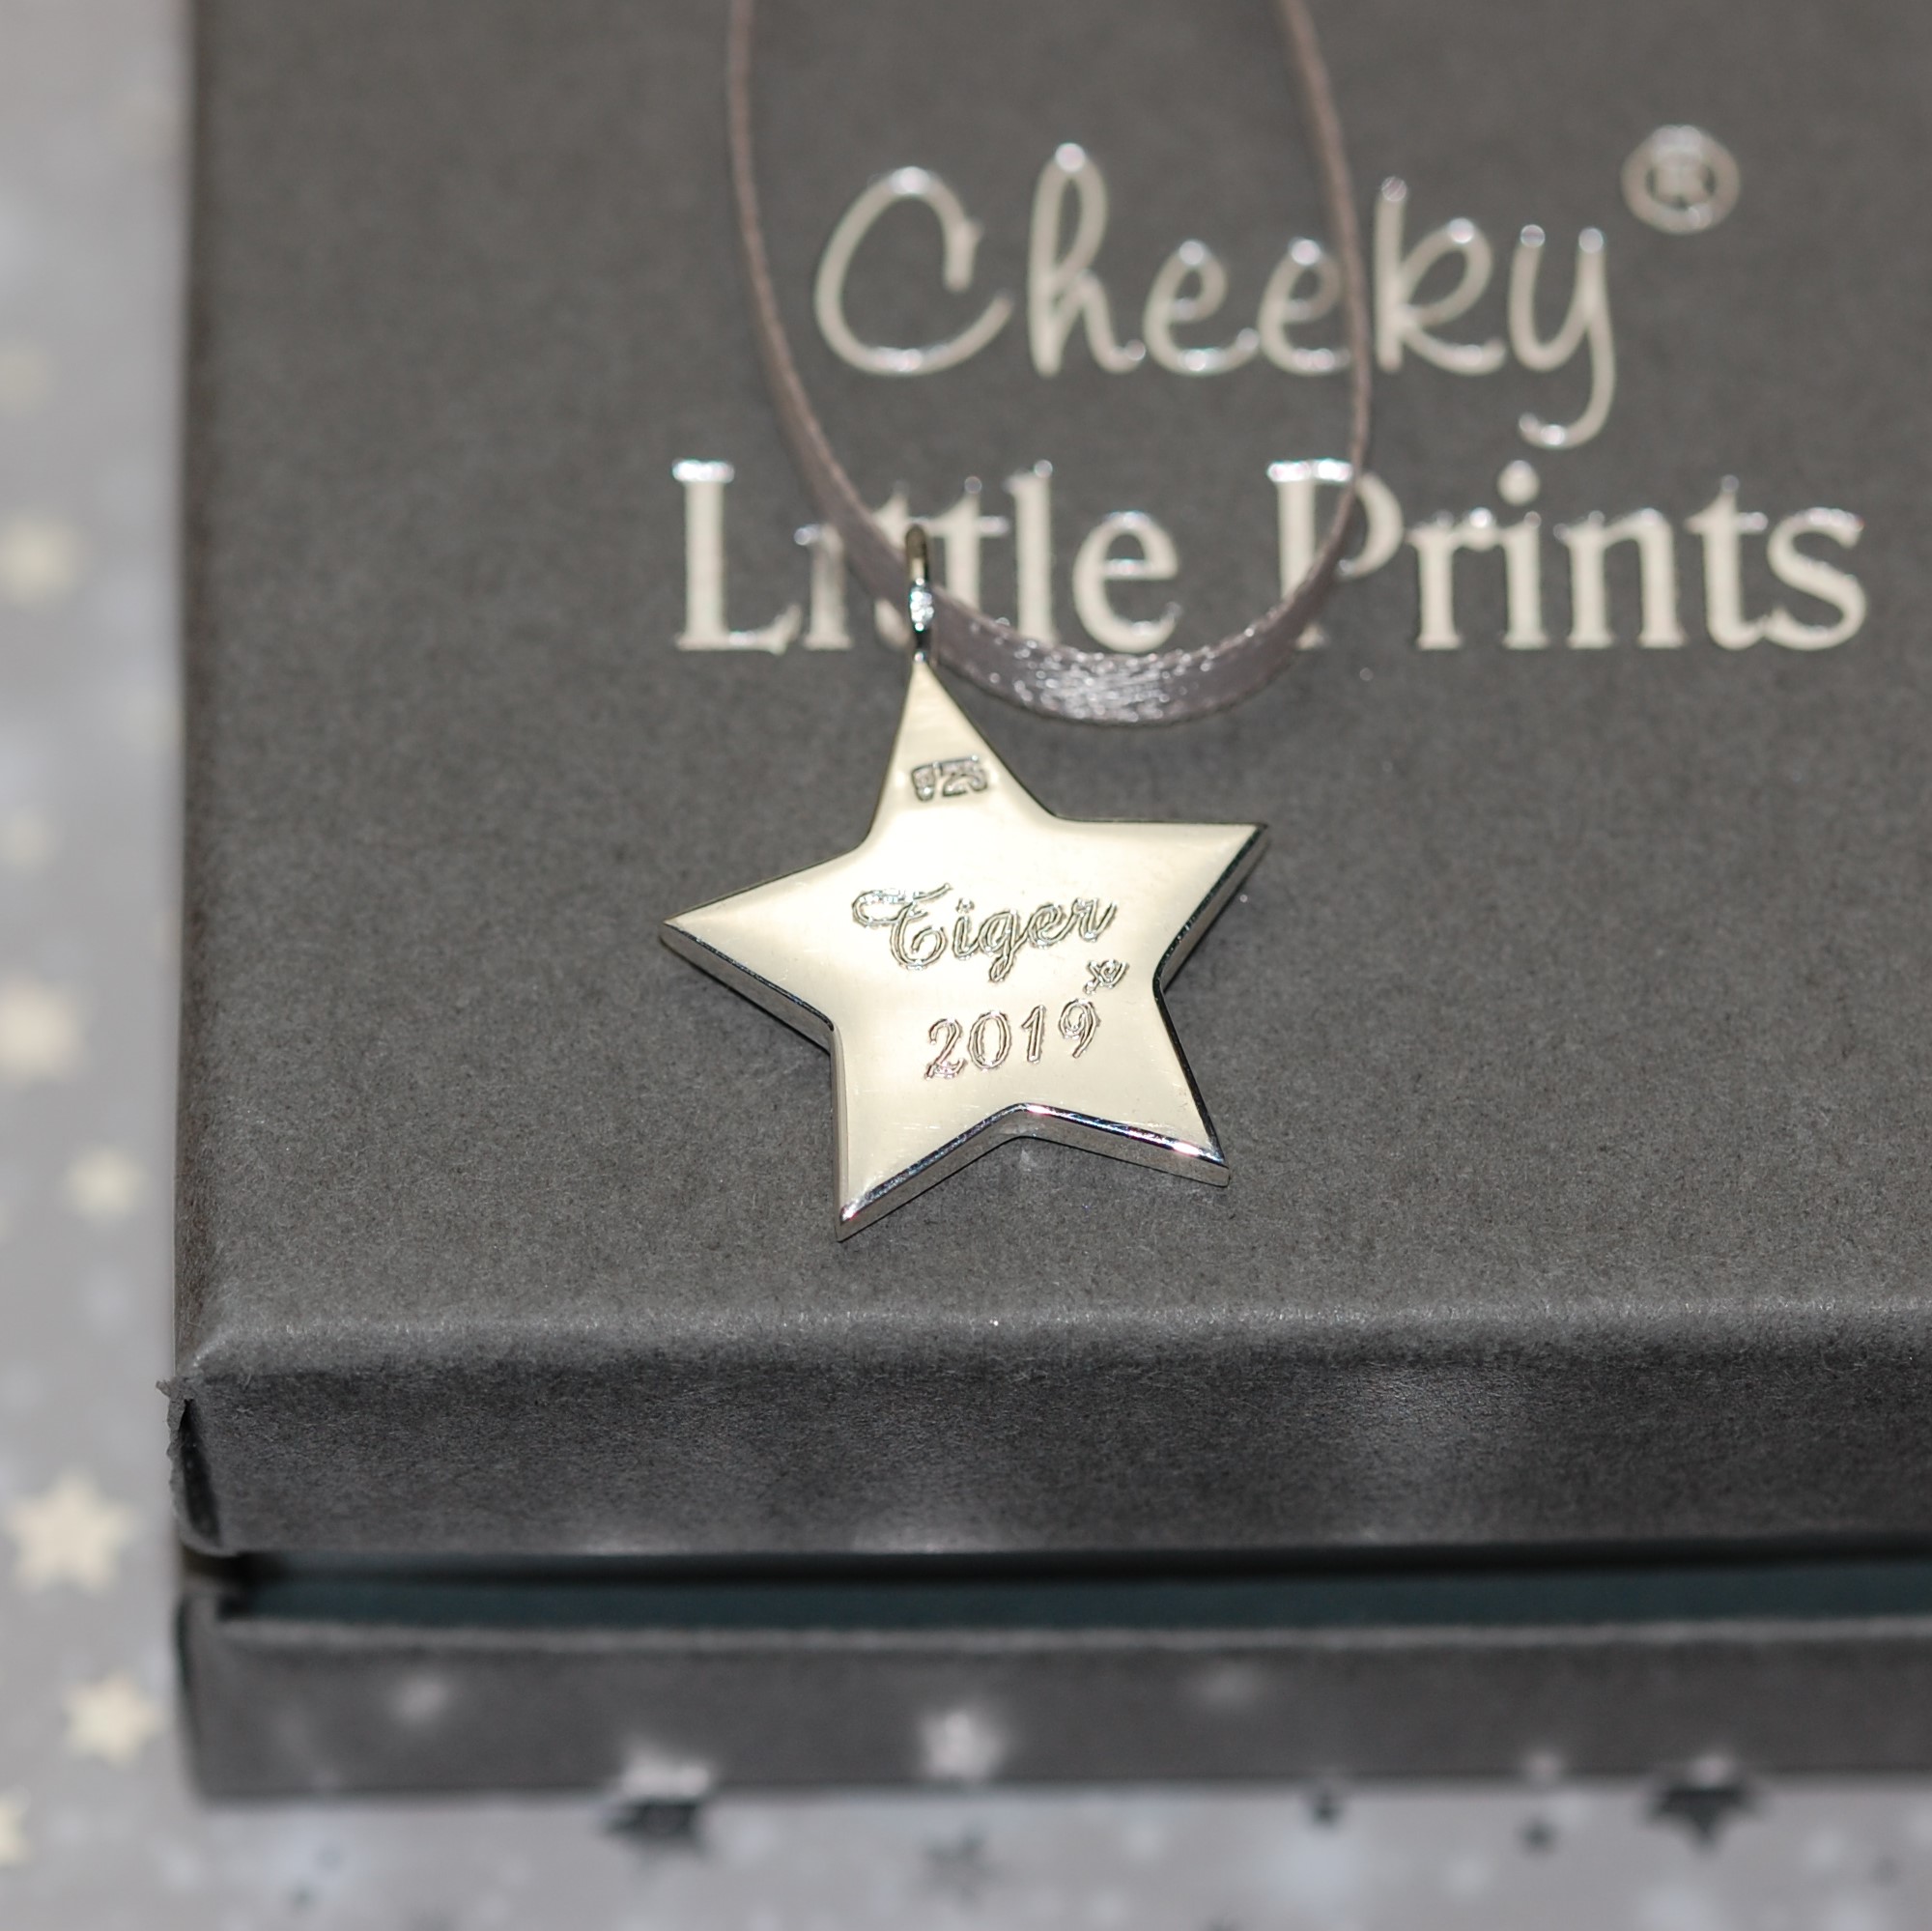 Pet name engraved on the back of sterling silver star with pet cremation ashes